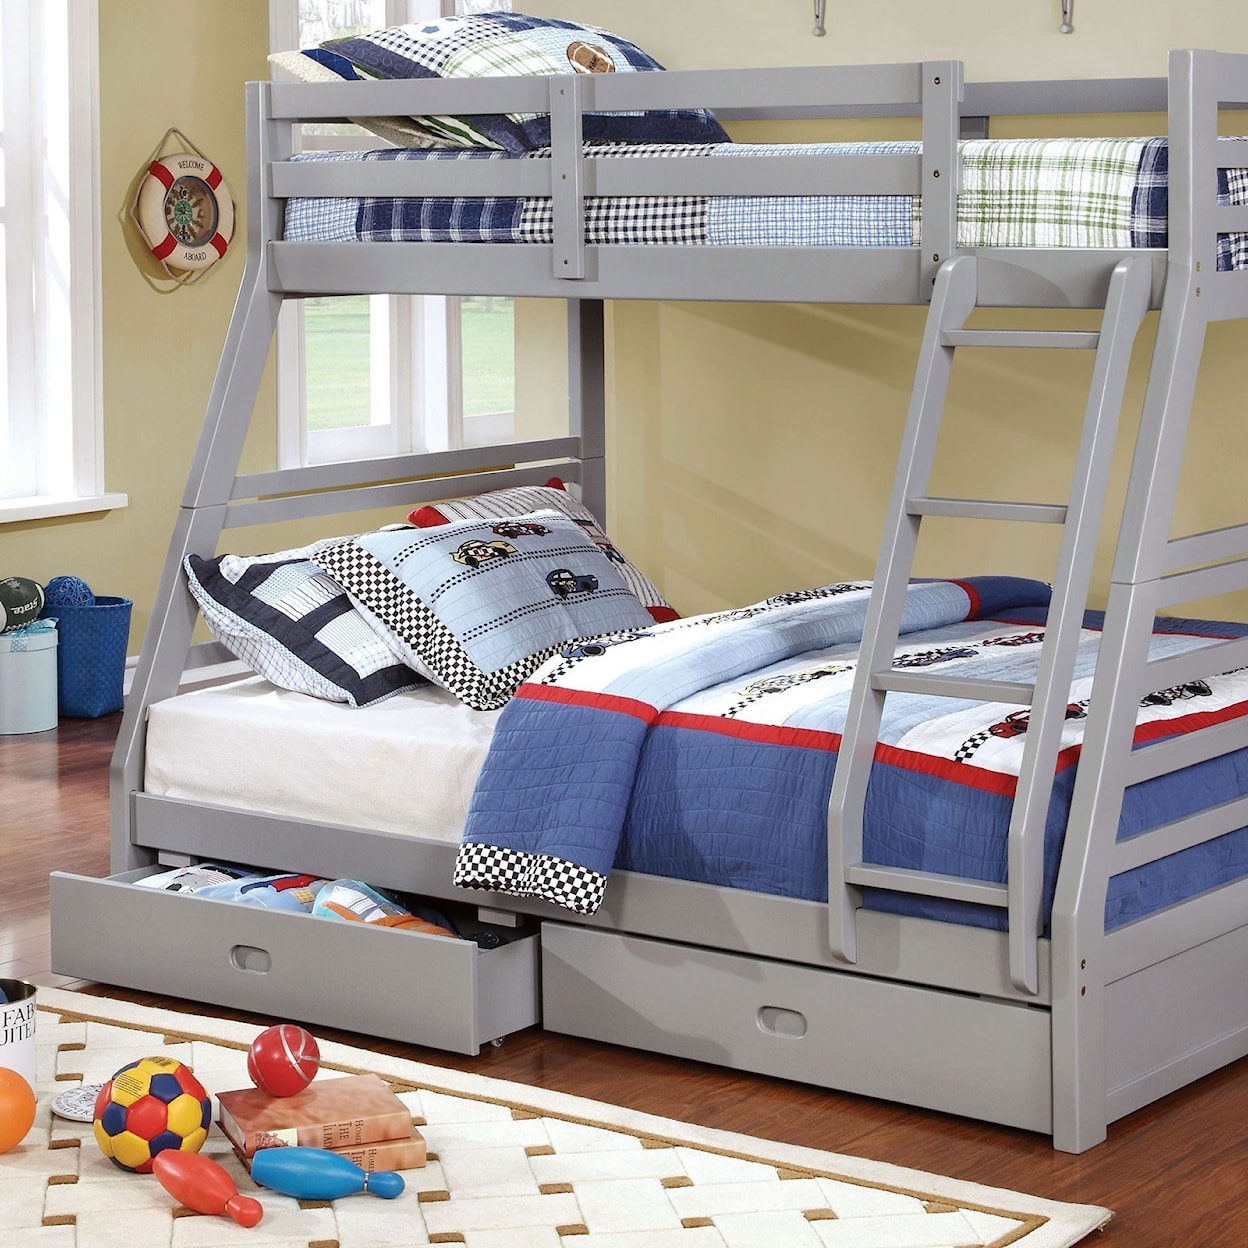 Furniture of America California III Twin-over-Full Bunk Bed with 2 Drawers